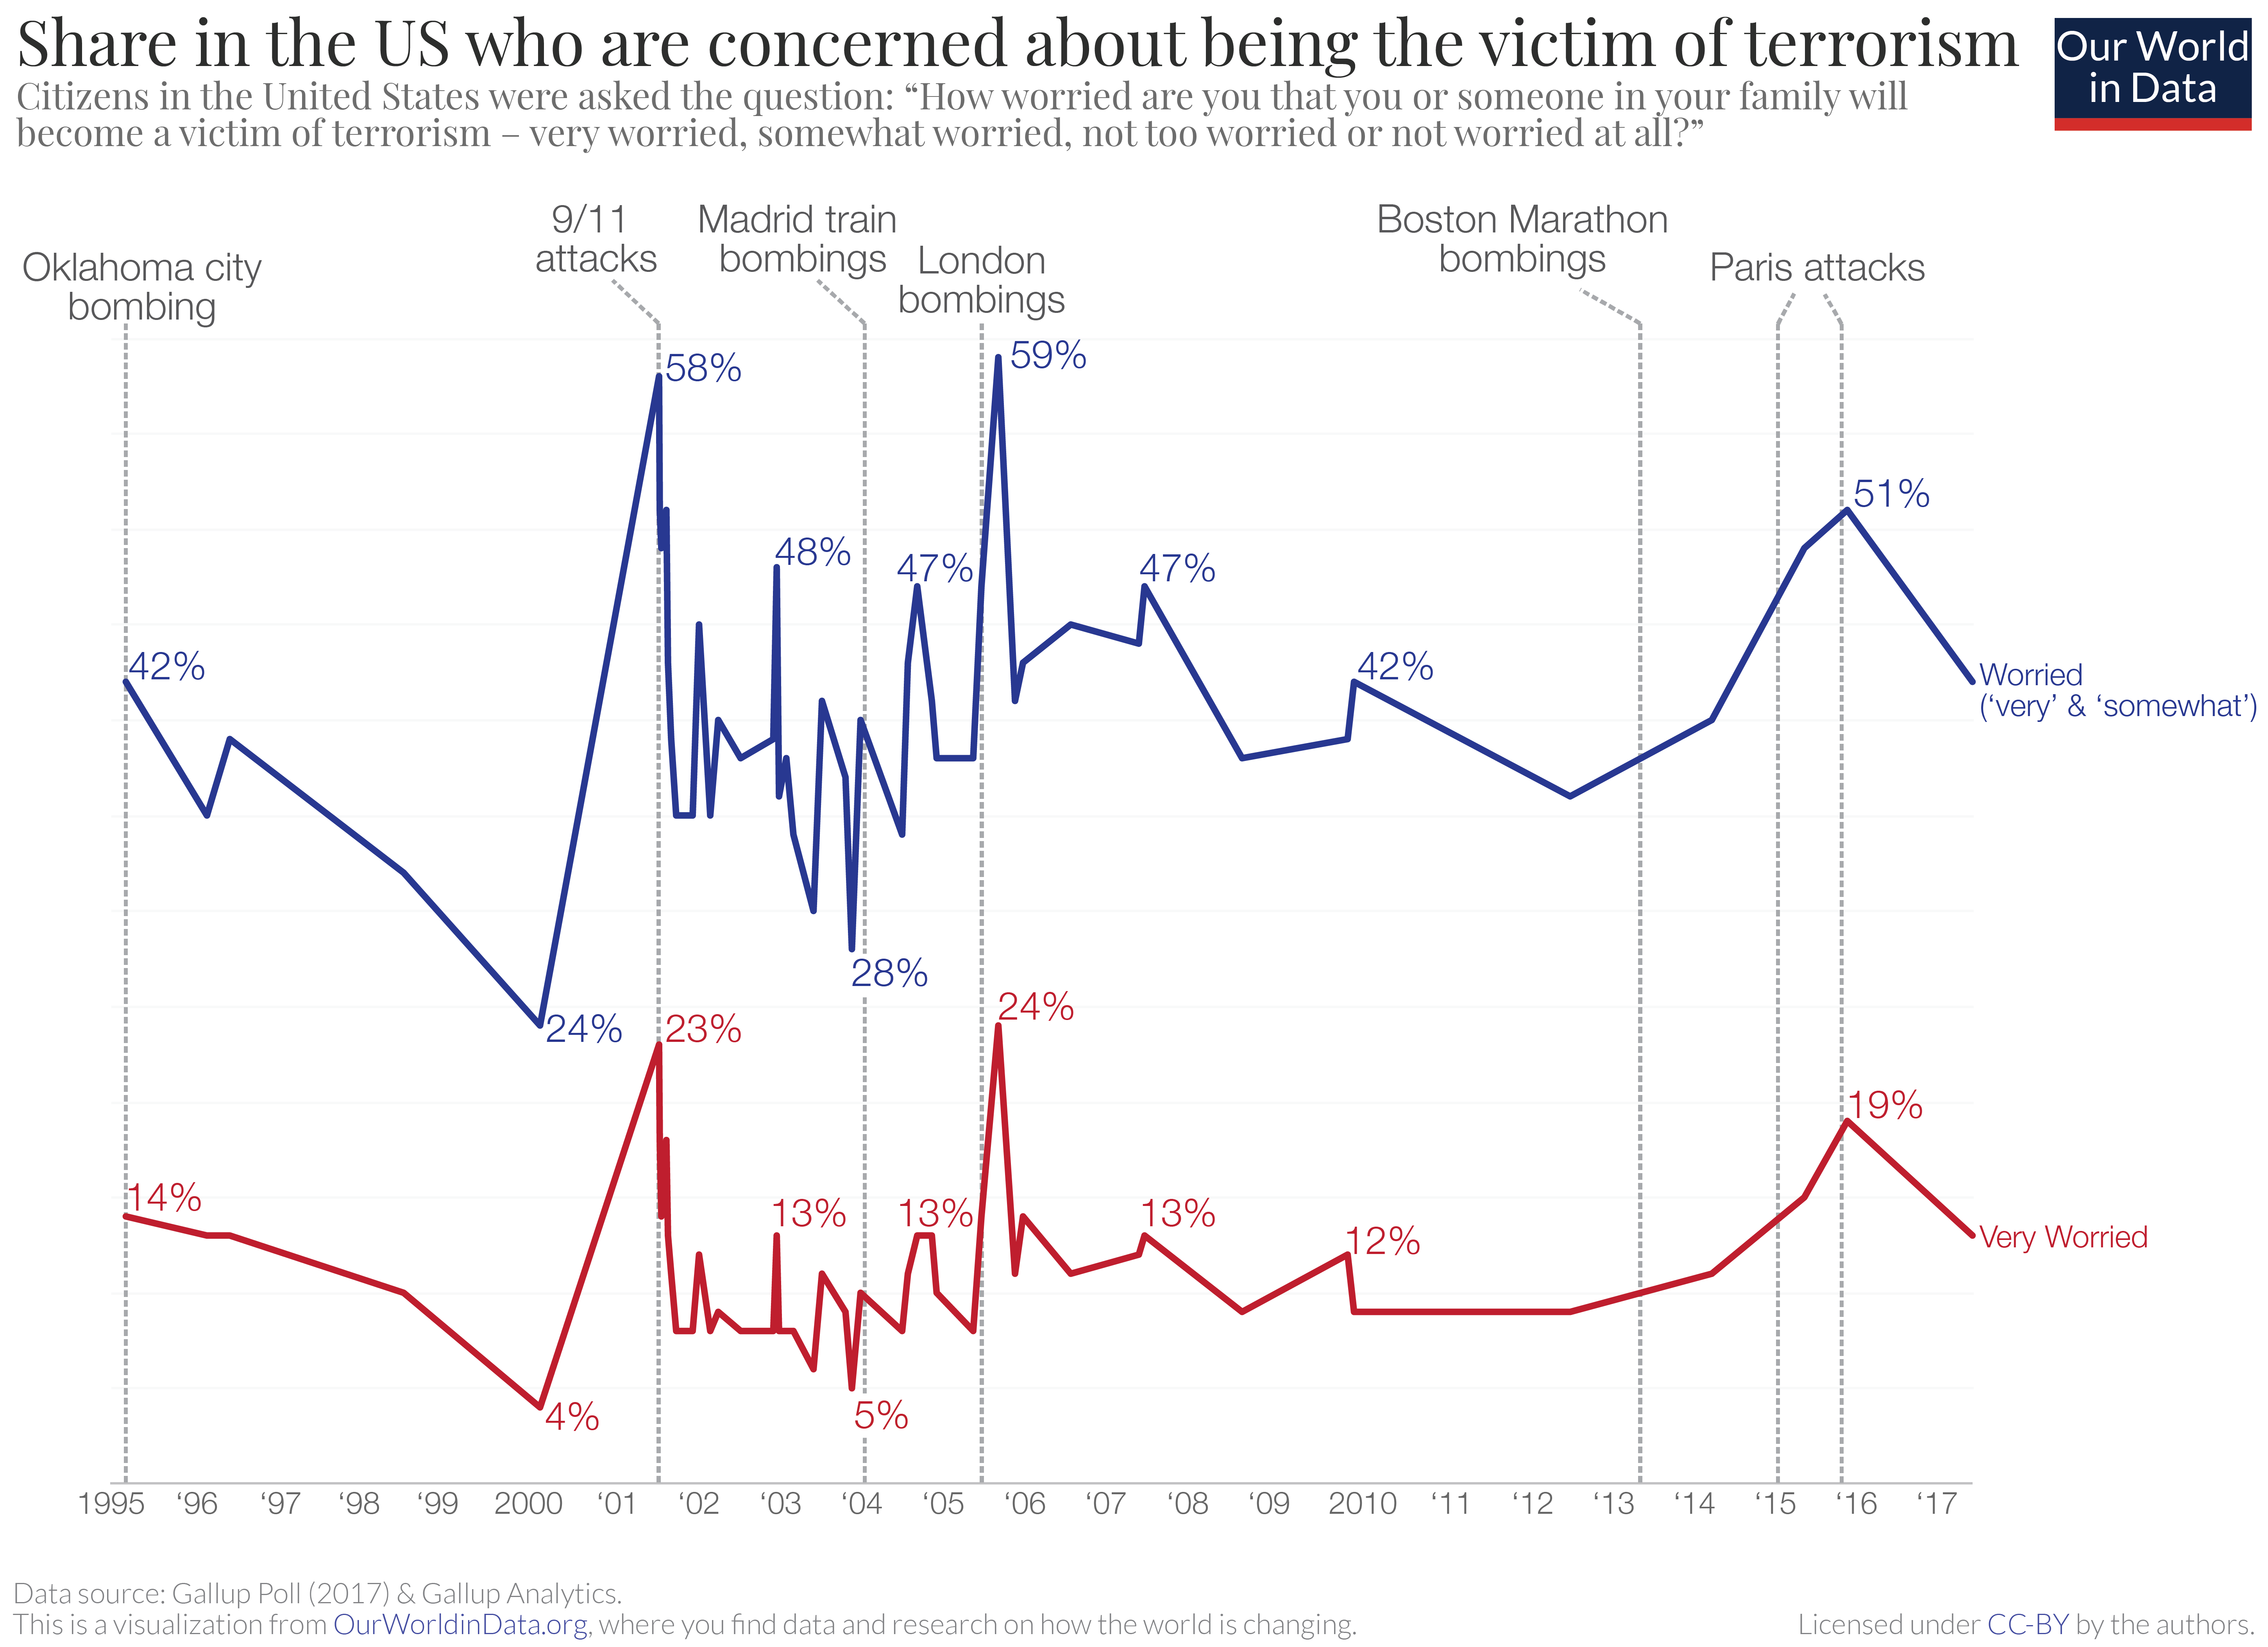 Share in the us worried about terrorism